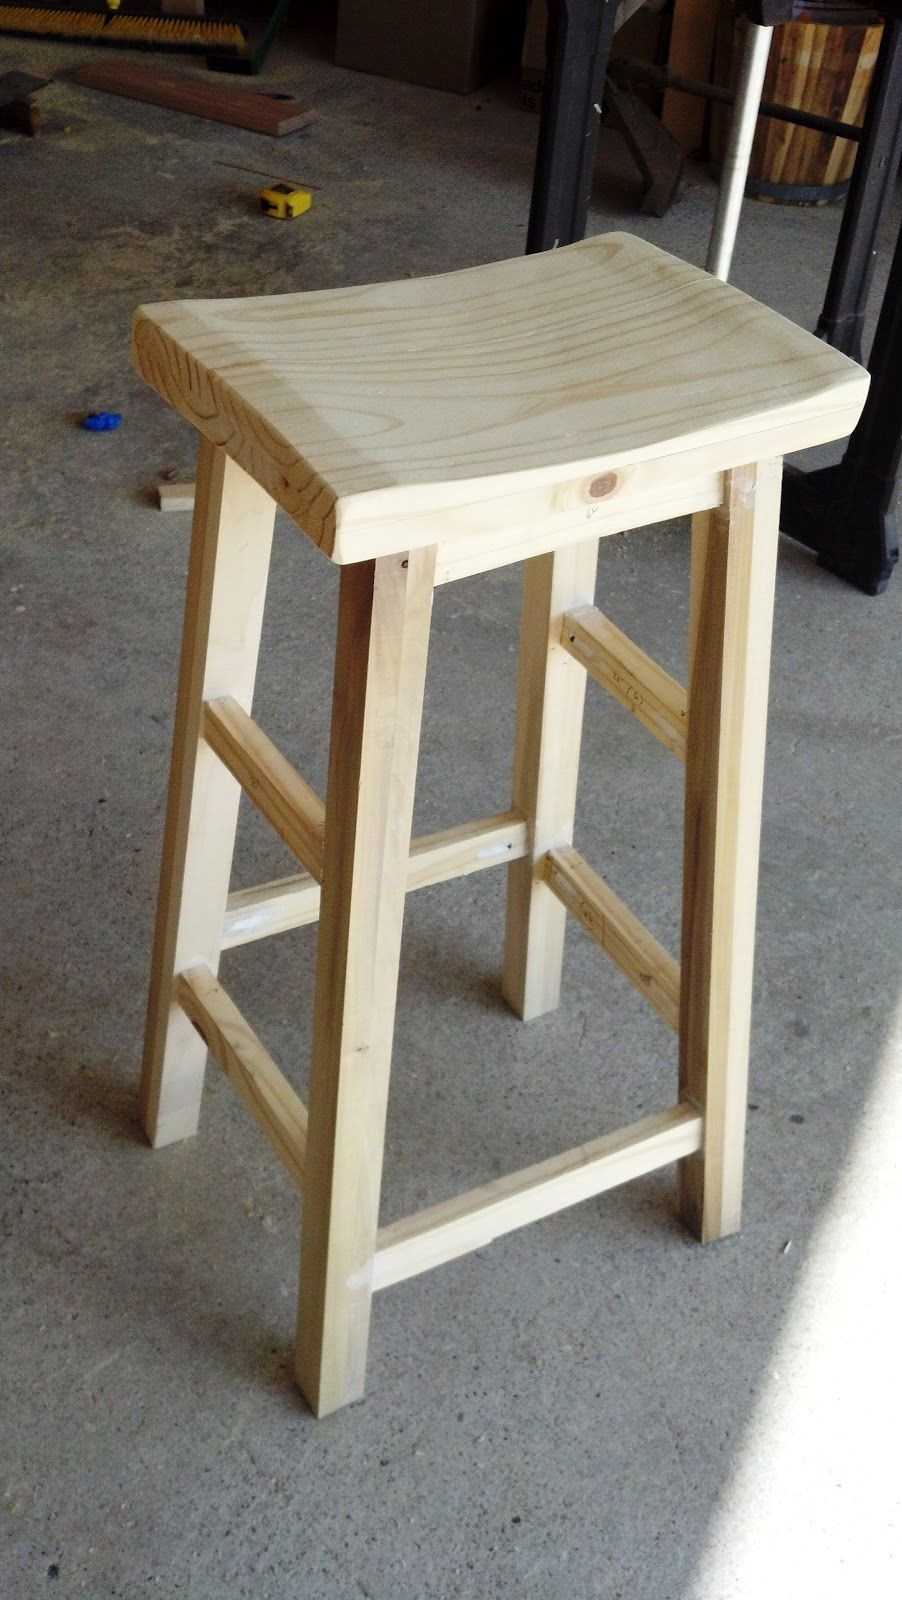 DIY Wooden Stools
 DIY Barstools Add to the honey please do list